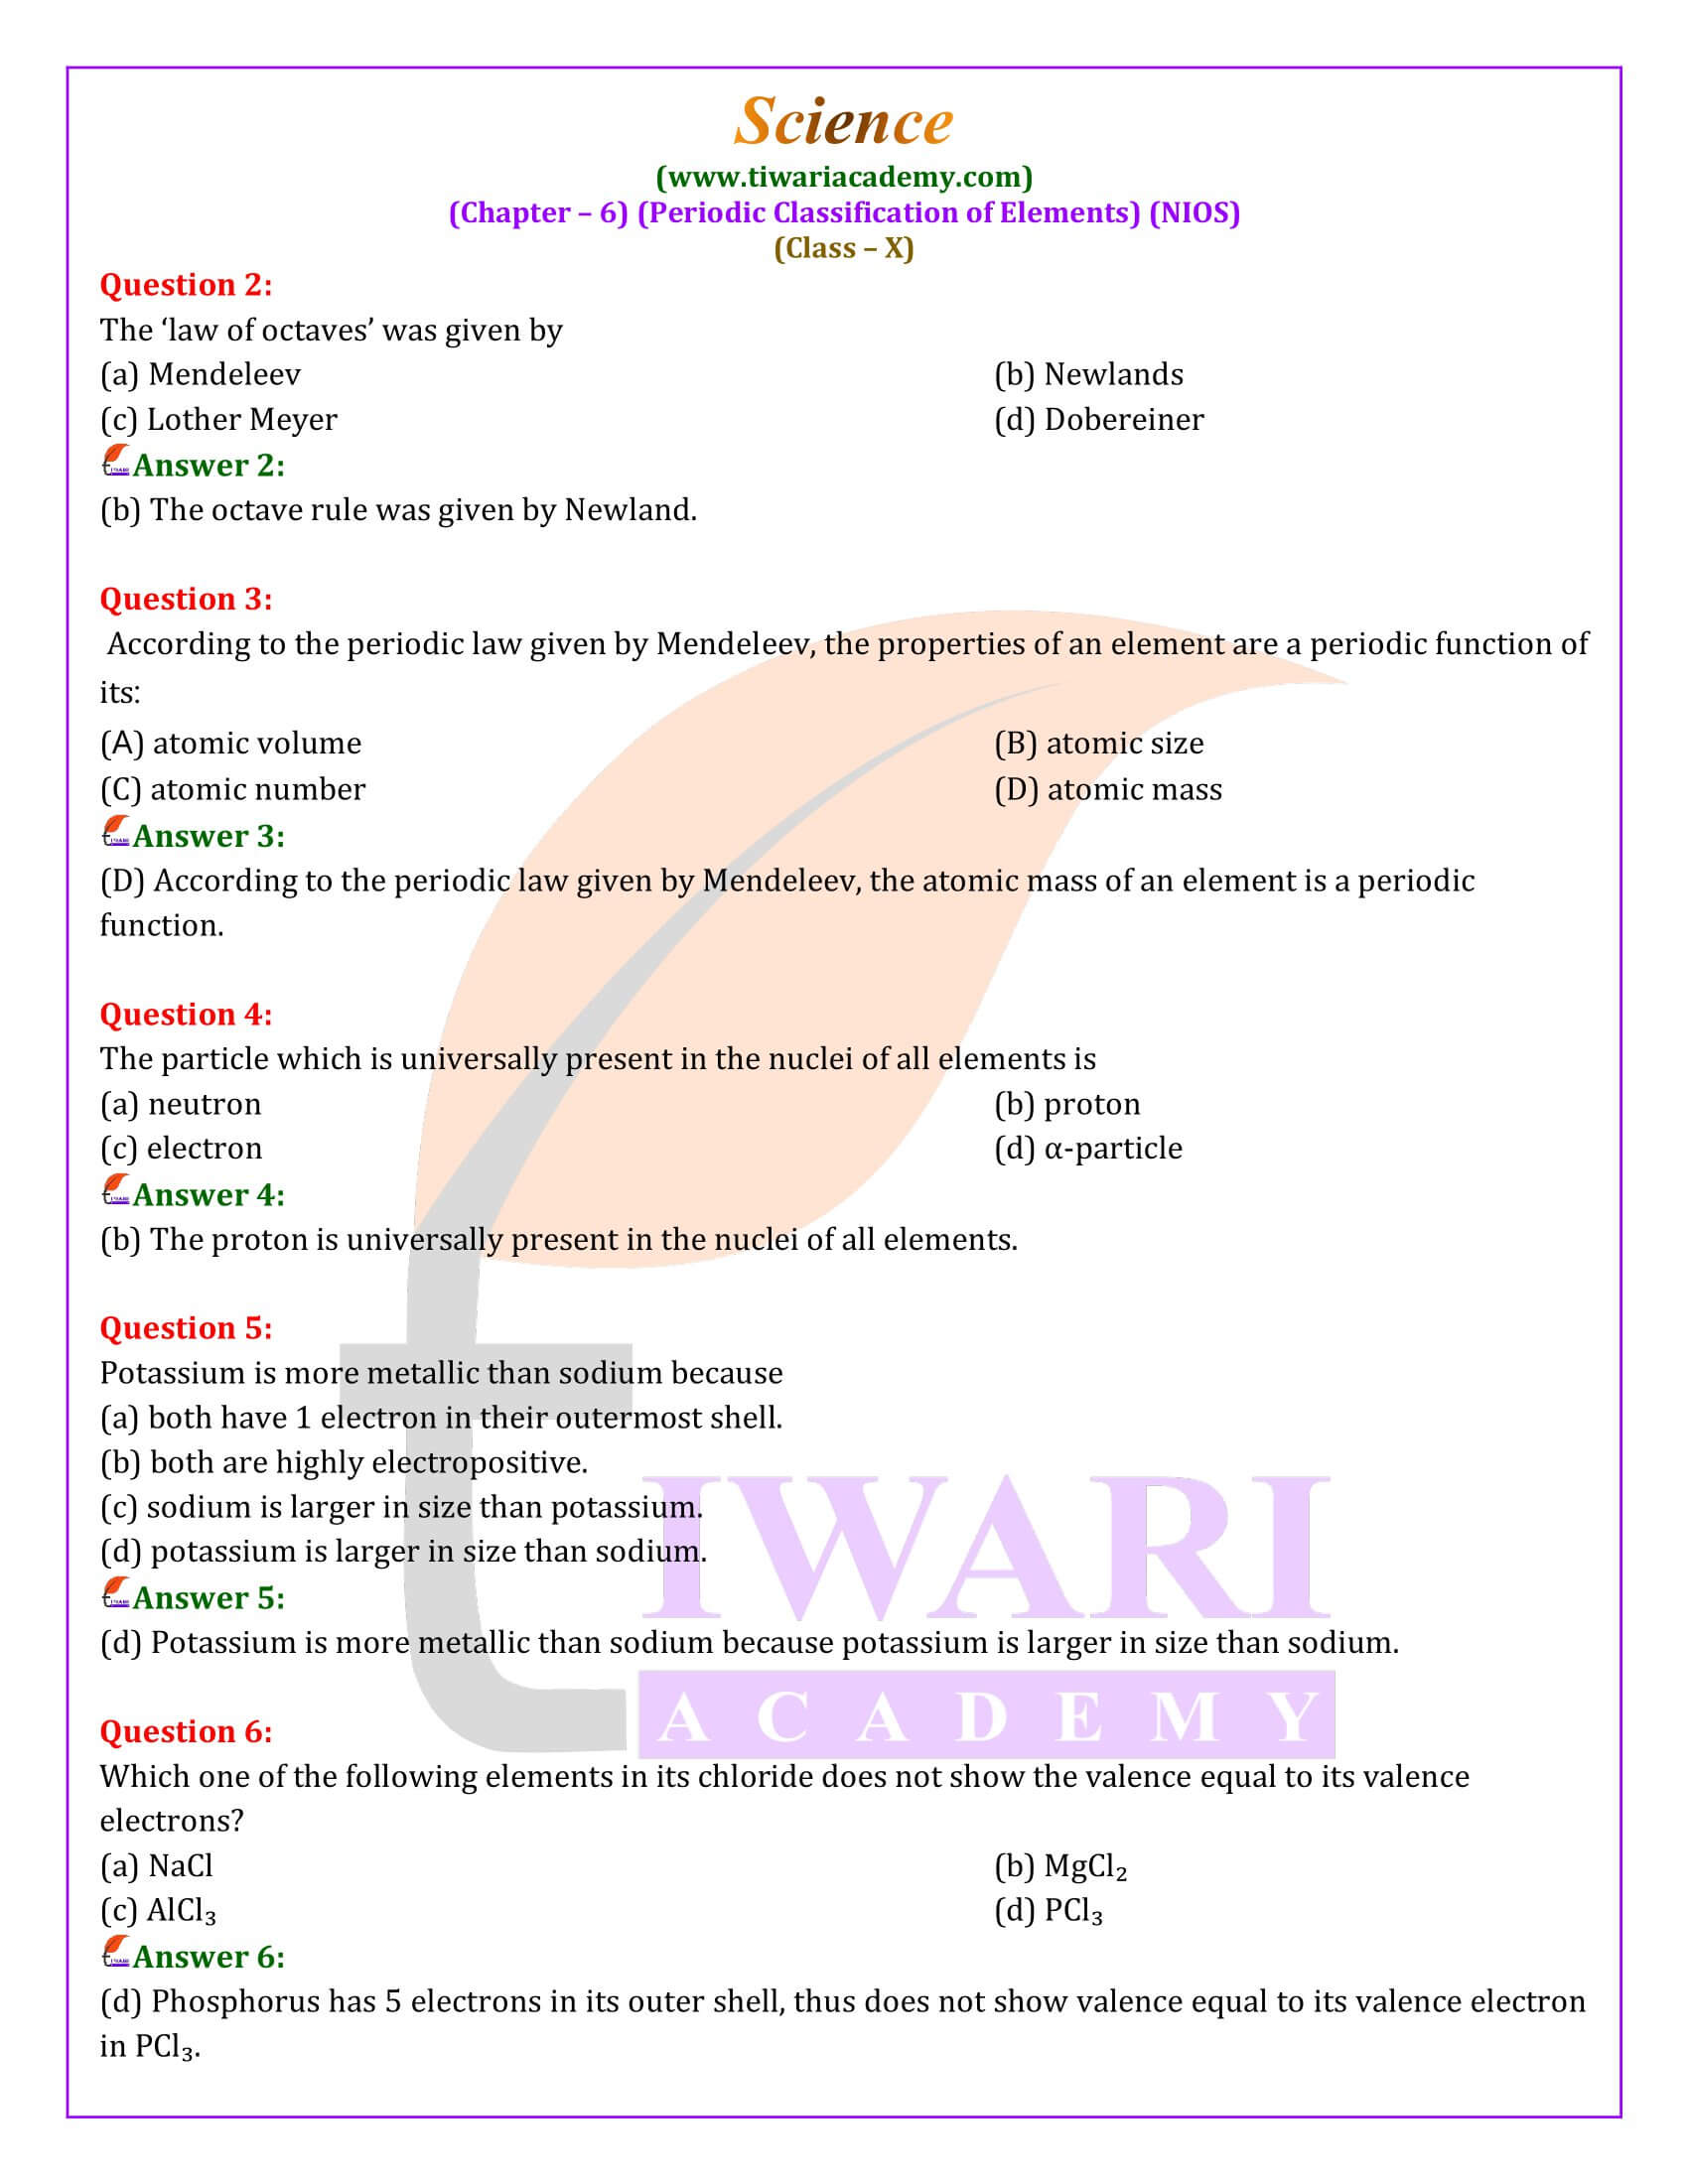 NIOS Class 10 Science Chapter 6 Periodic Classification of Elements QA